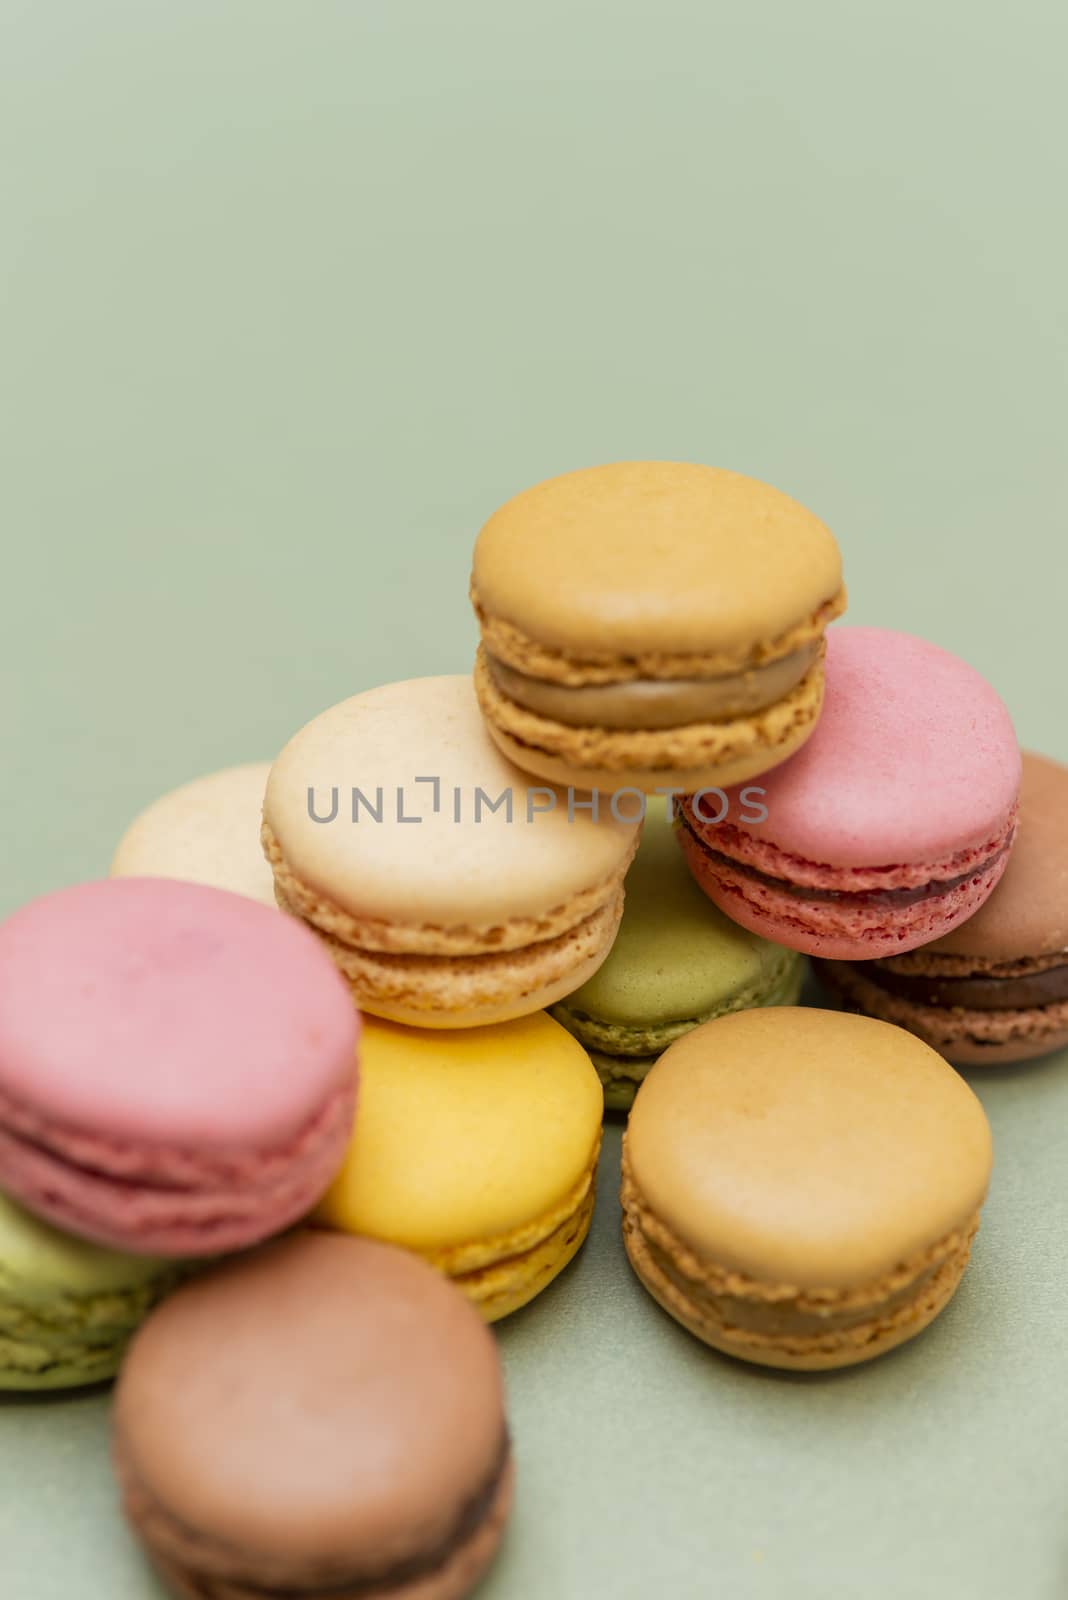 Colored tasty  macaroons over a green background.